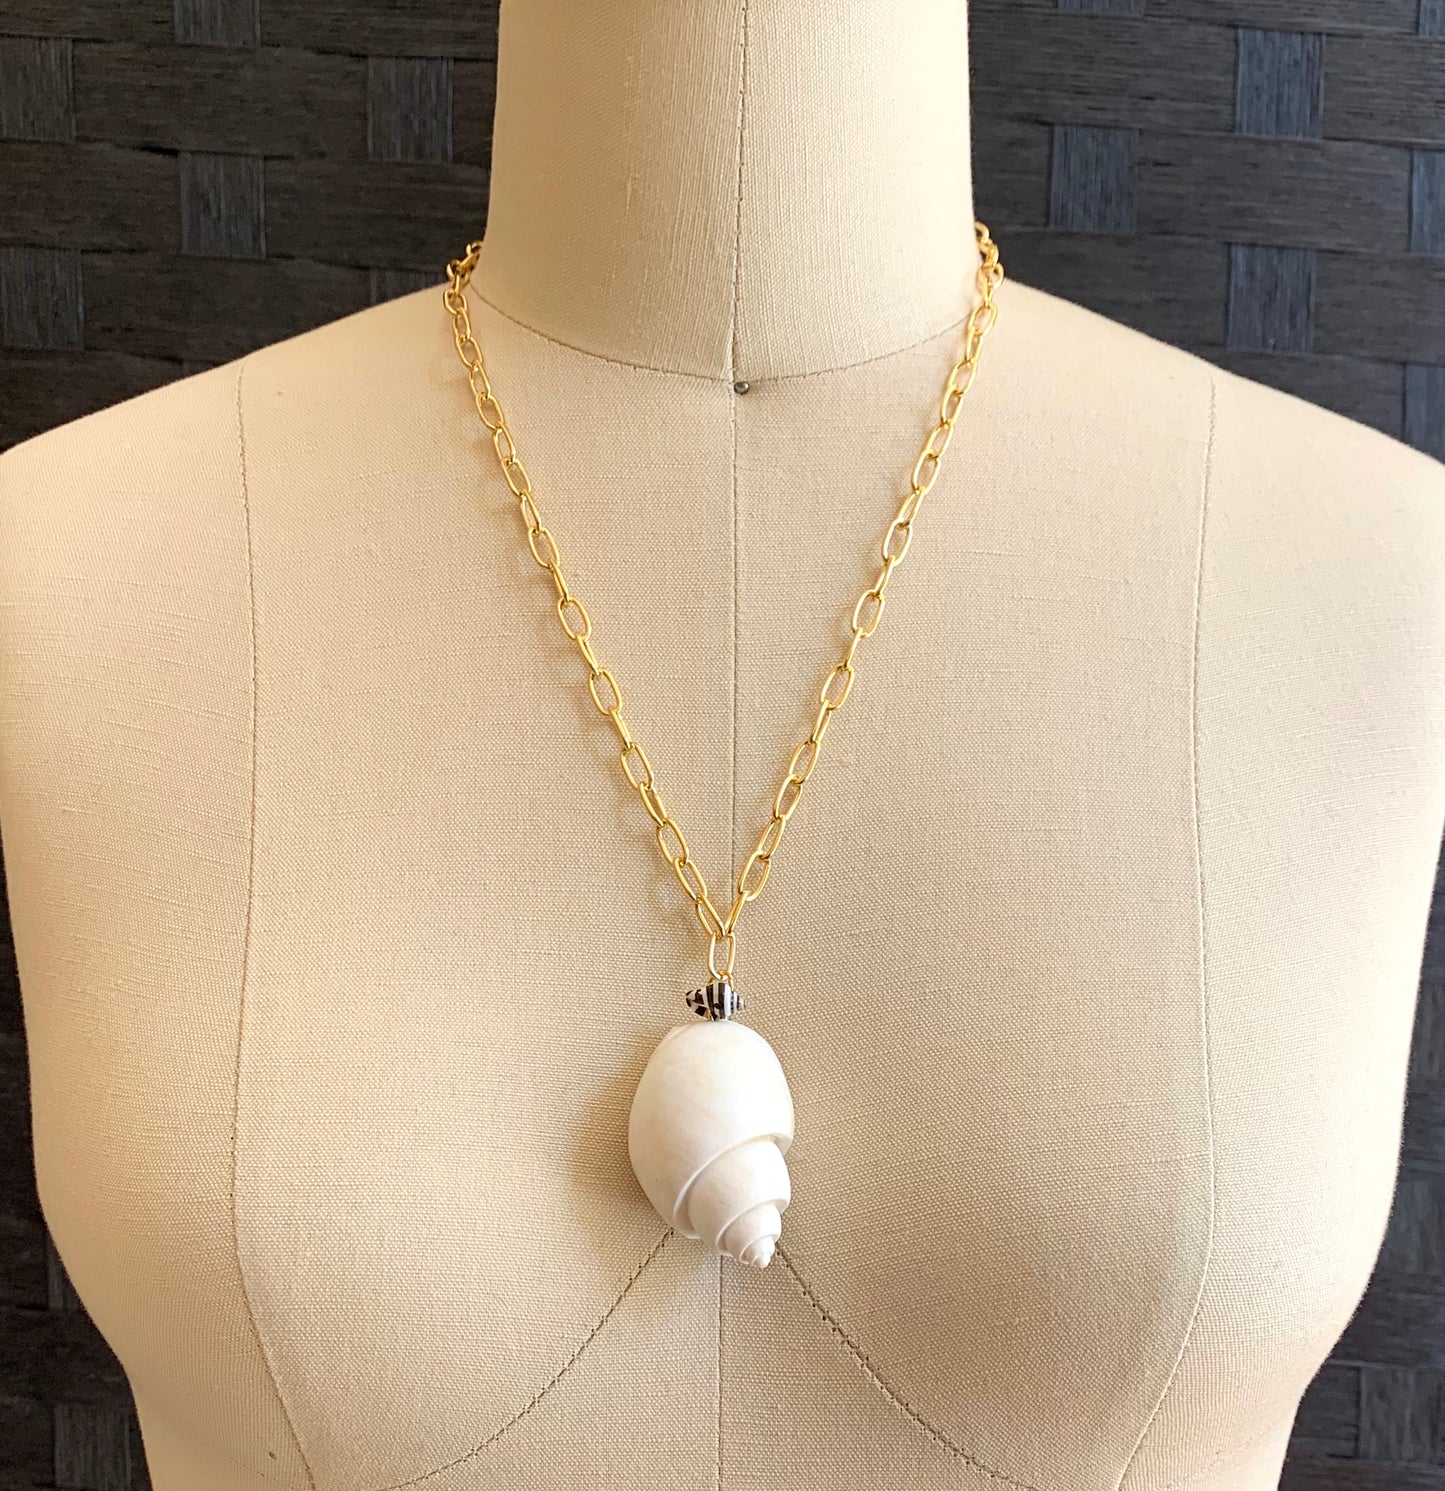 White Tulip Seashell Necklace with Black & White Striped Shell Charm, 18K Gold Plated Paperclip Chain